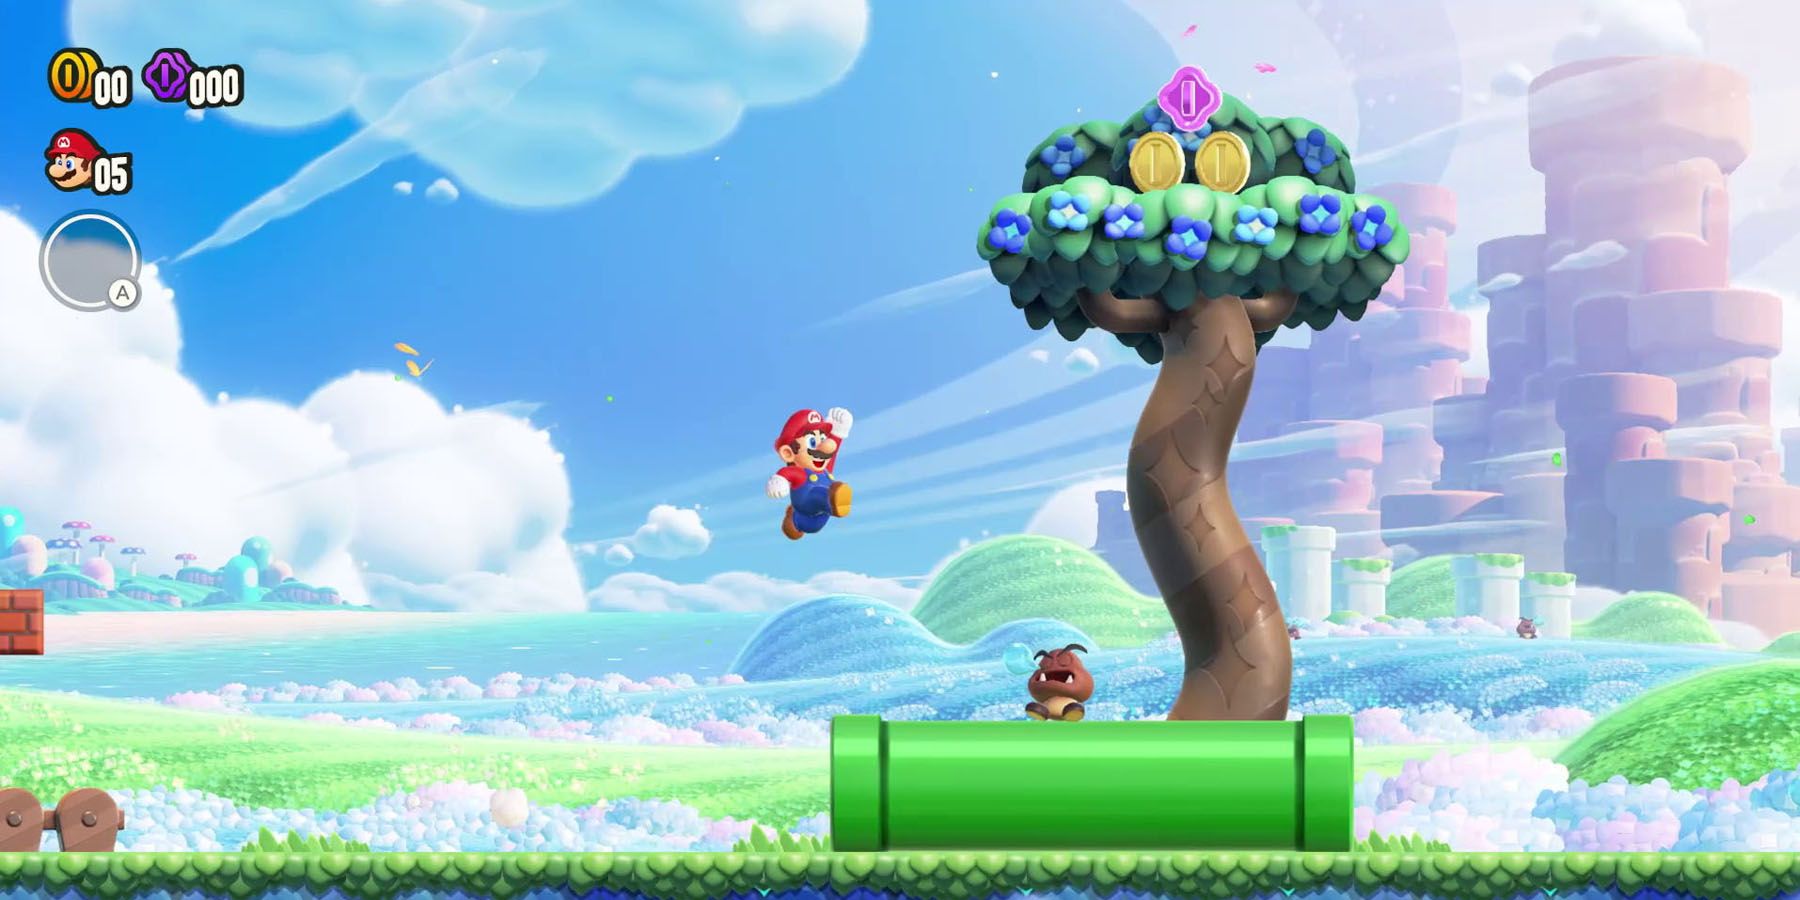 A screenshot of Mario about to jump on a Goomba in Super Mario Bros. Wonder.